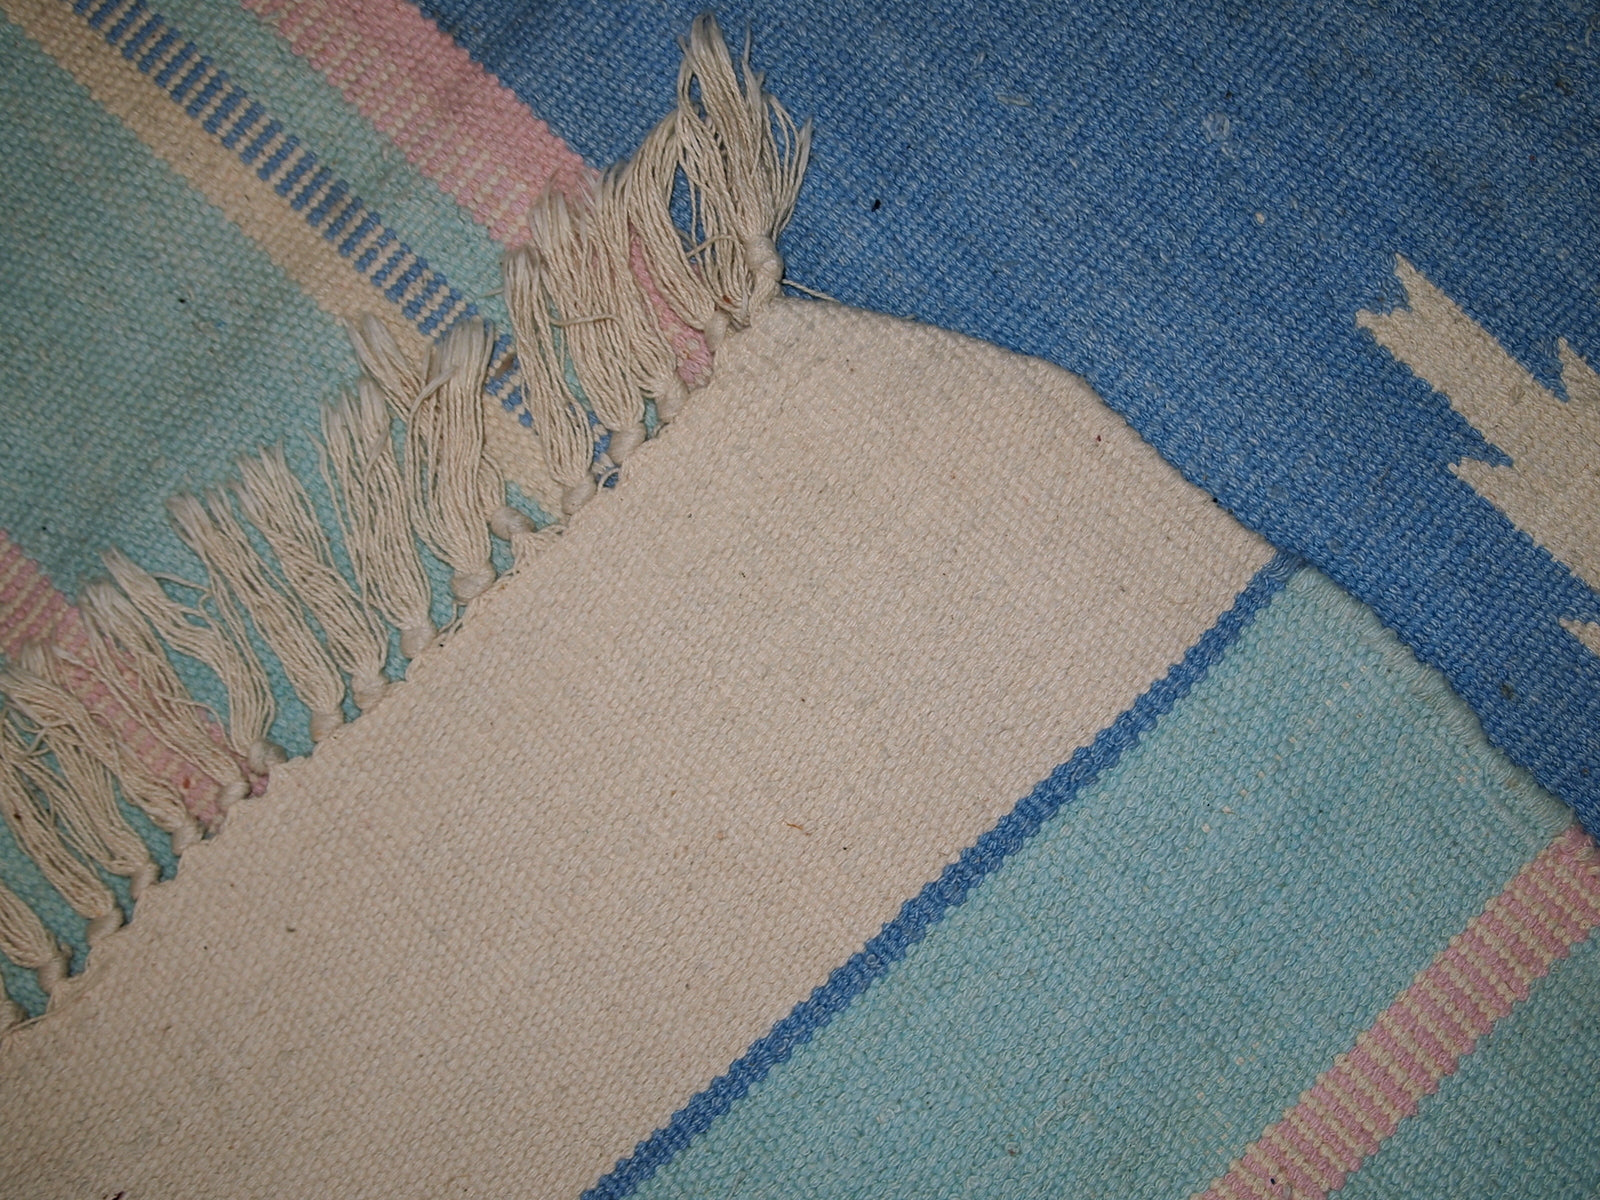 Detail shot of the kilim's vintage 1960s design with sea blue and pink stripes